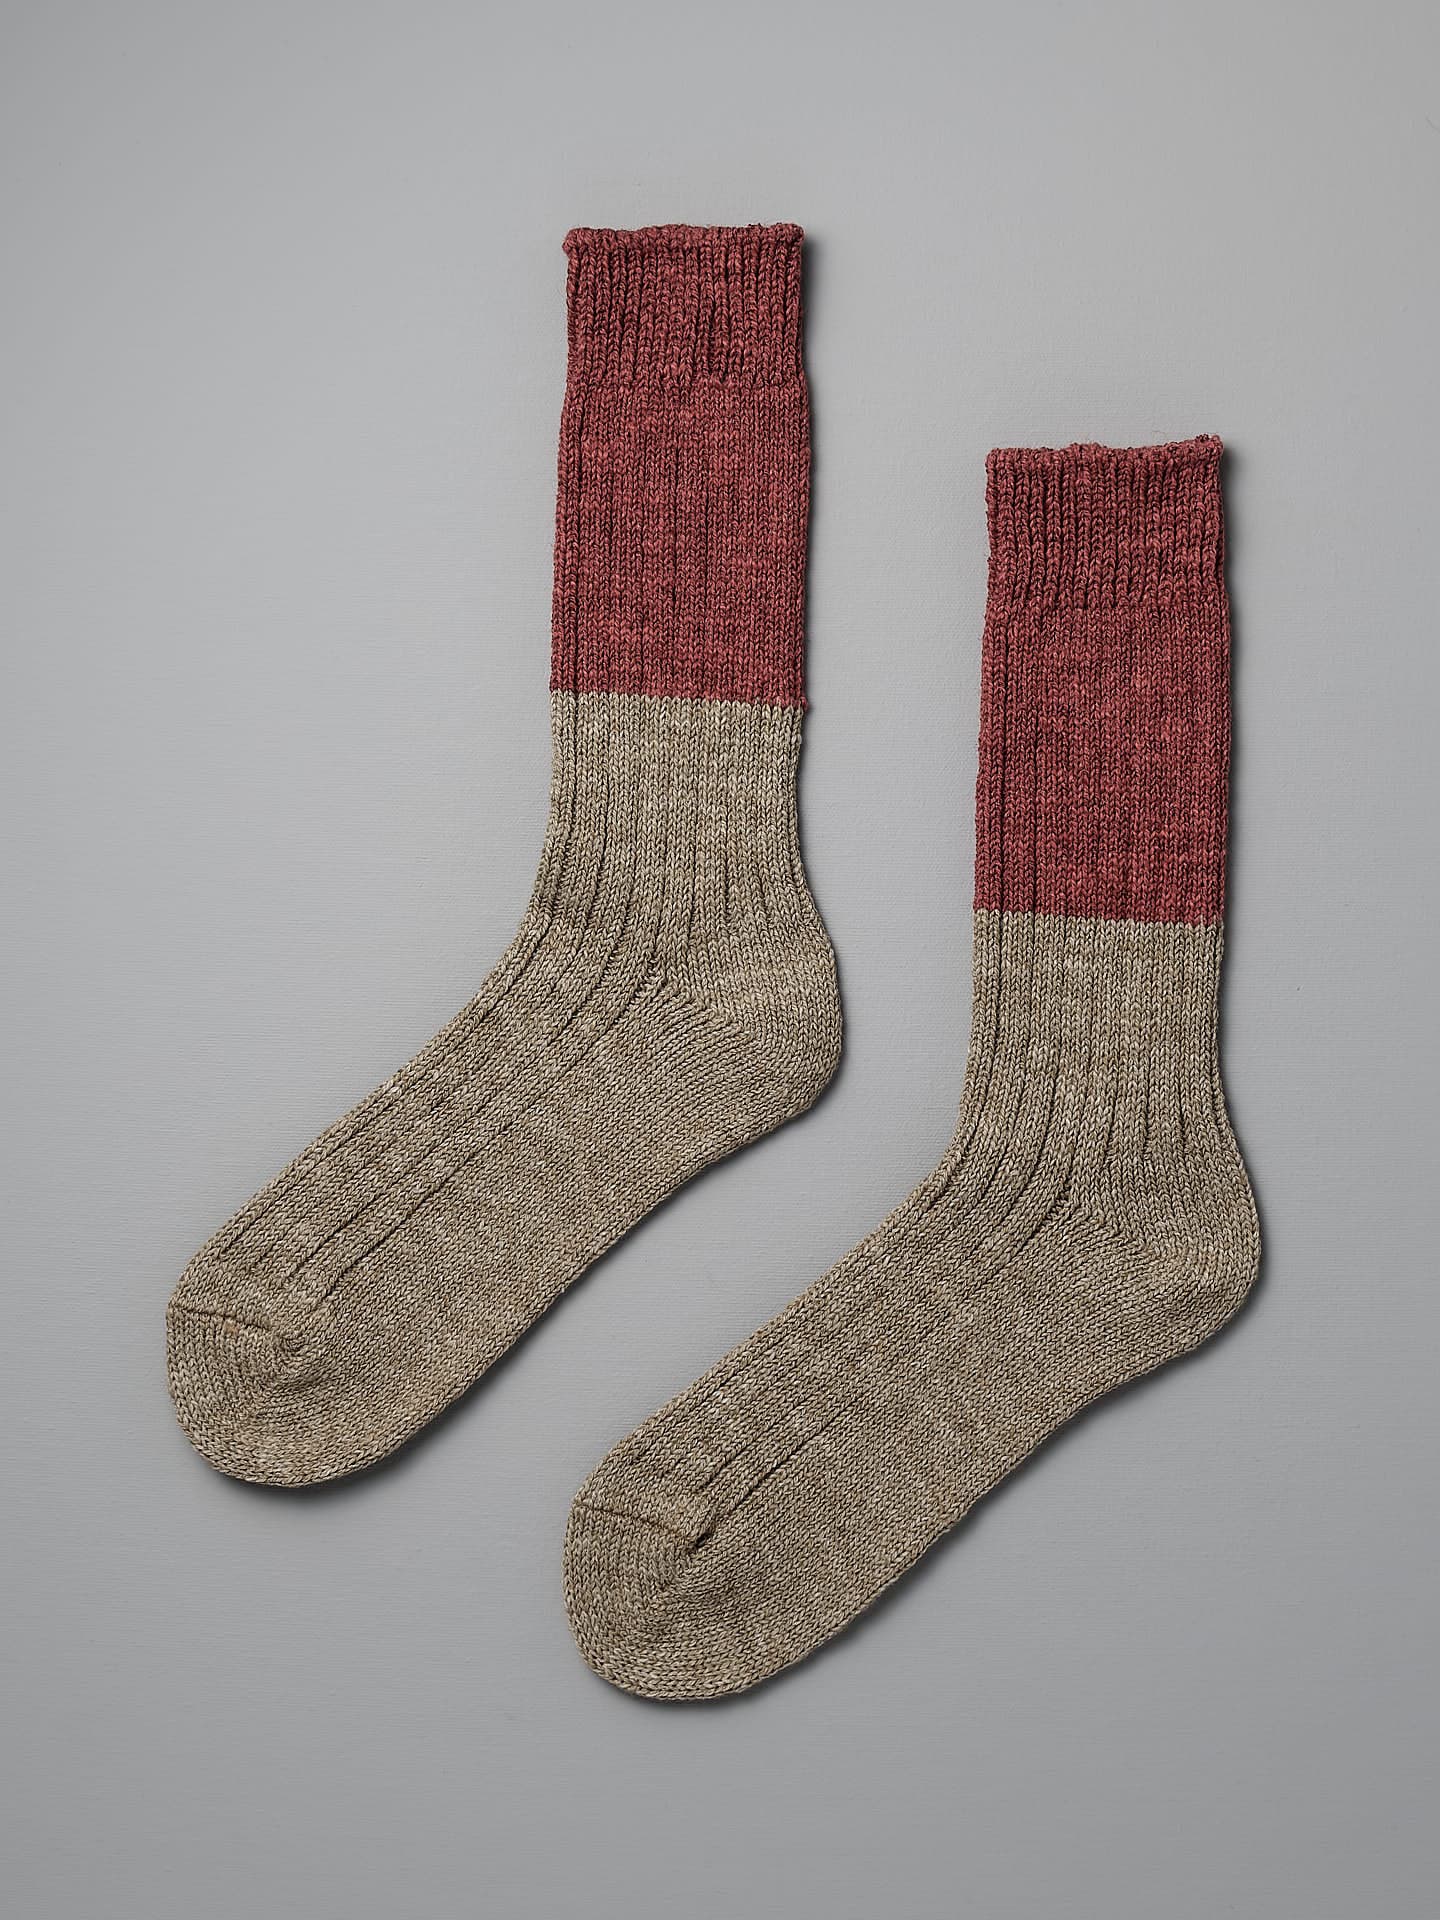 A pair of Nishiguchi Kutsushita Boston Slab Socks – Red Brick with a red upper section and a gray lower section, placed side by side on a flat, gray background, are available in various US Women's Sizes.